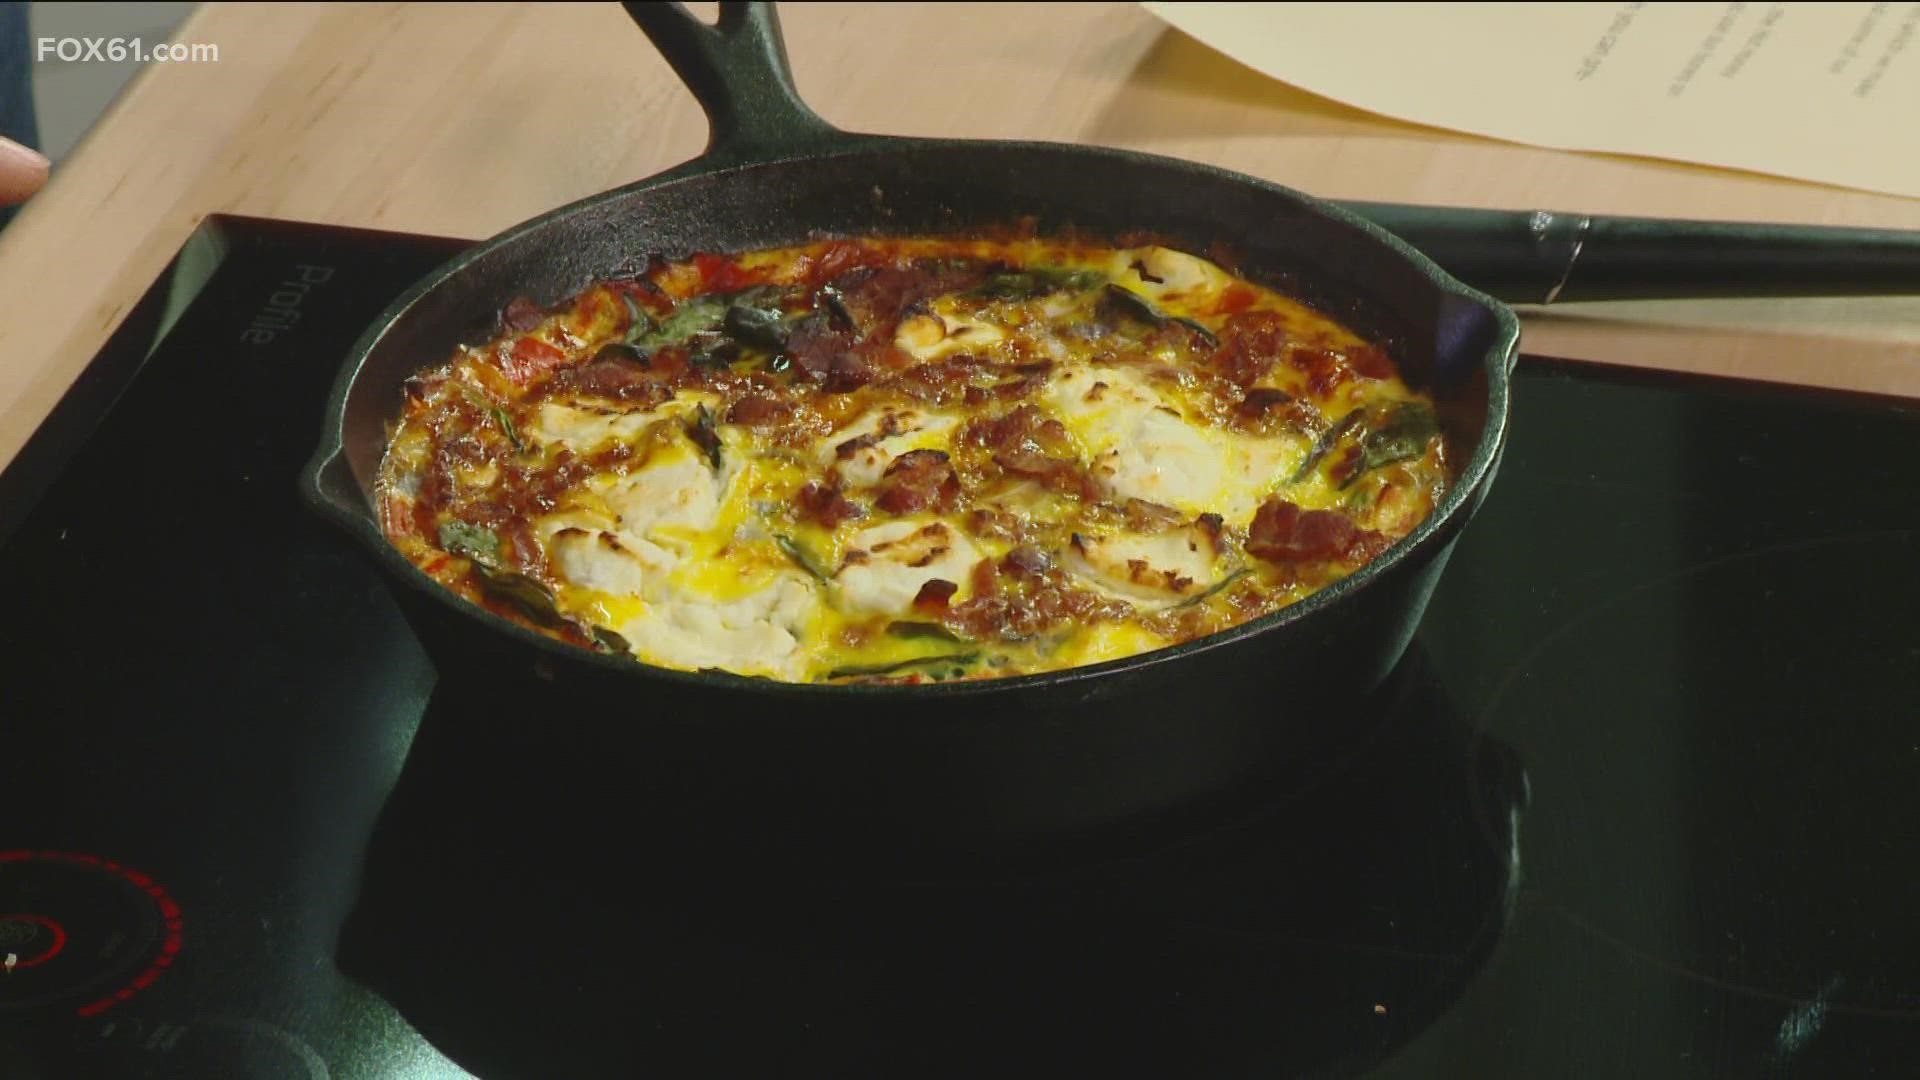 Little Pub was established in 2009 in Old Saybrook, offering a delicious menu and friendly atmosphere. Here's how to make a loaded baked frittata.